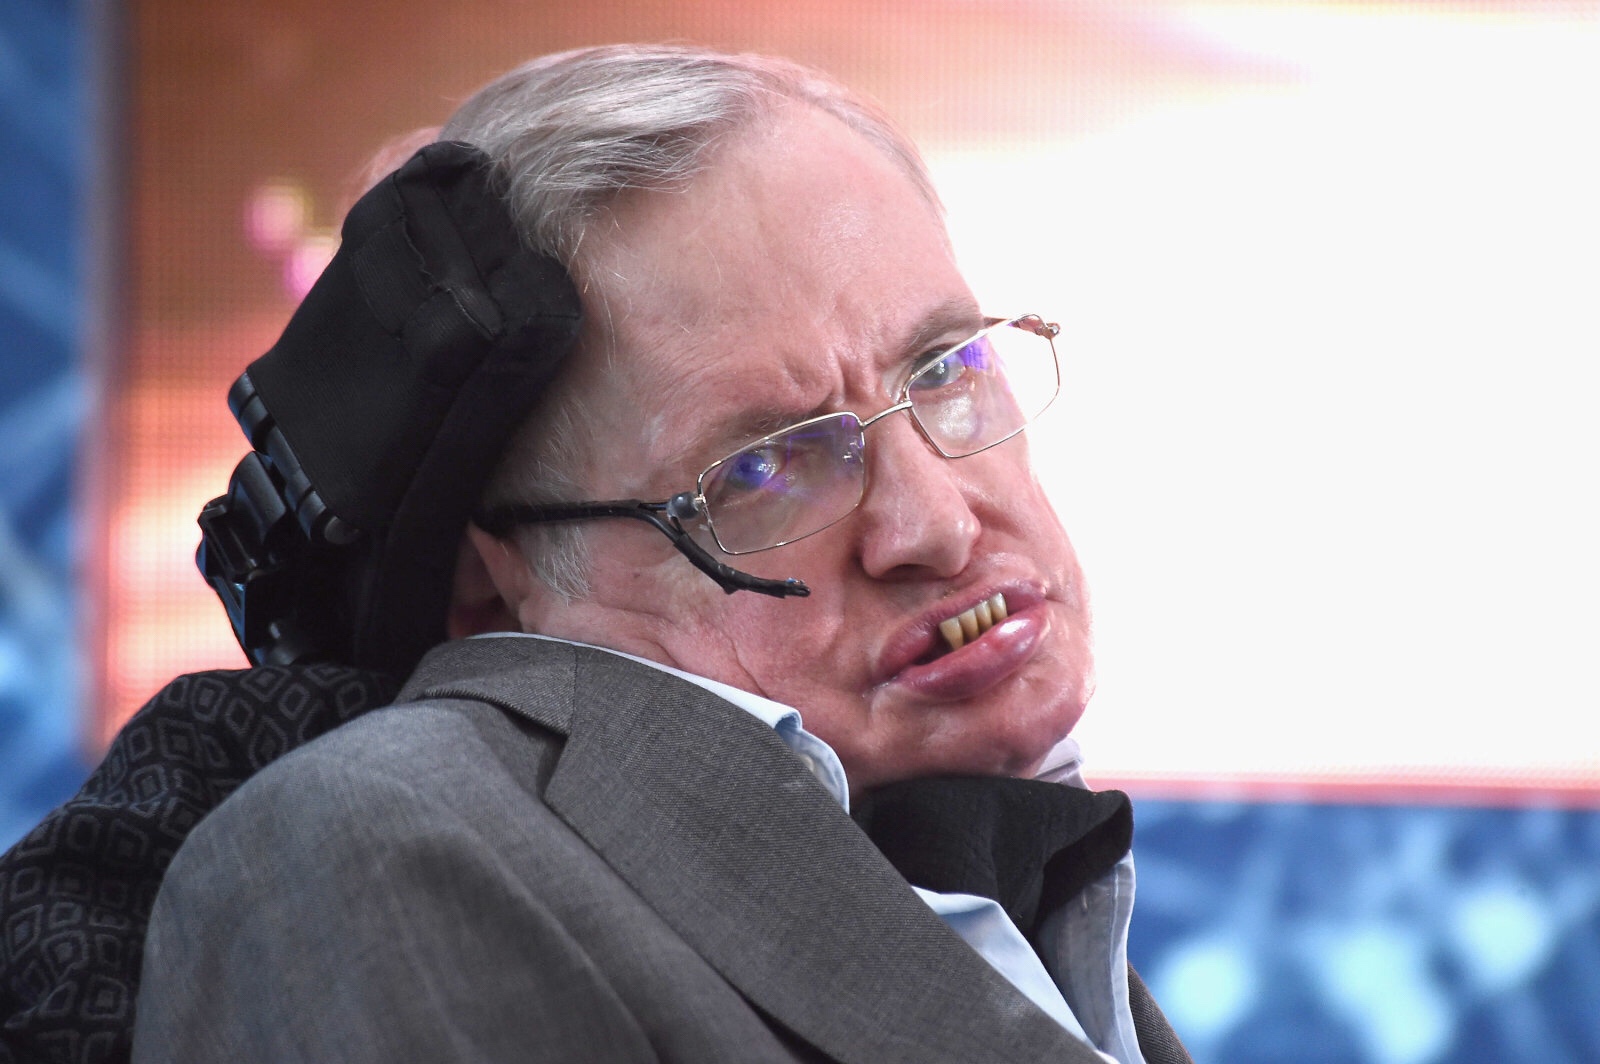 Stephen Hawking has passed away at age 76